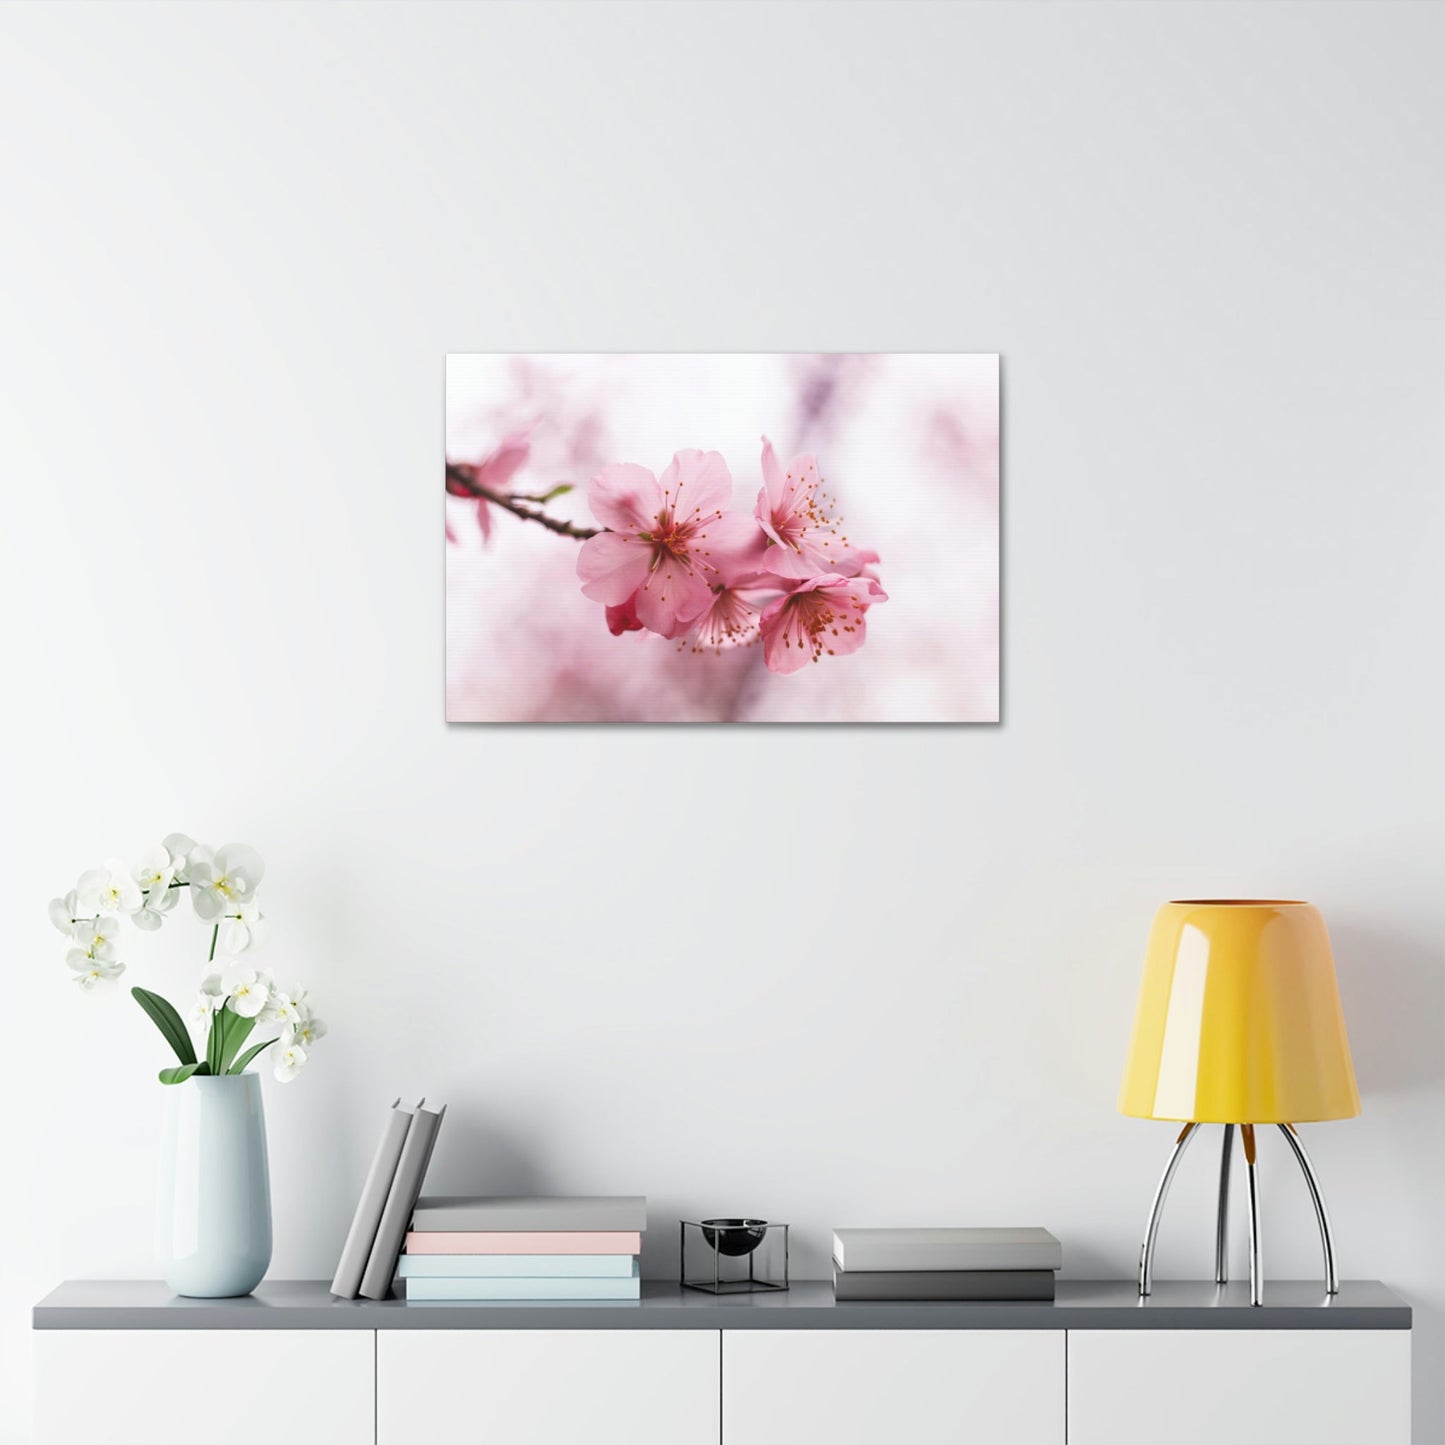 Japanese Garden: Cherry Blossoms on Natural Canvas